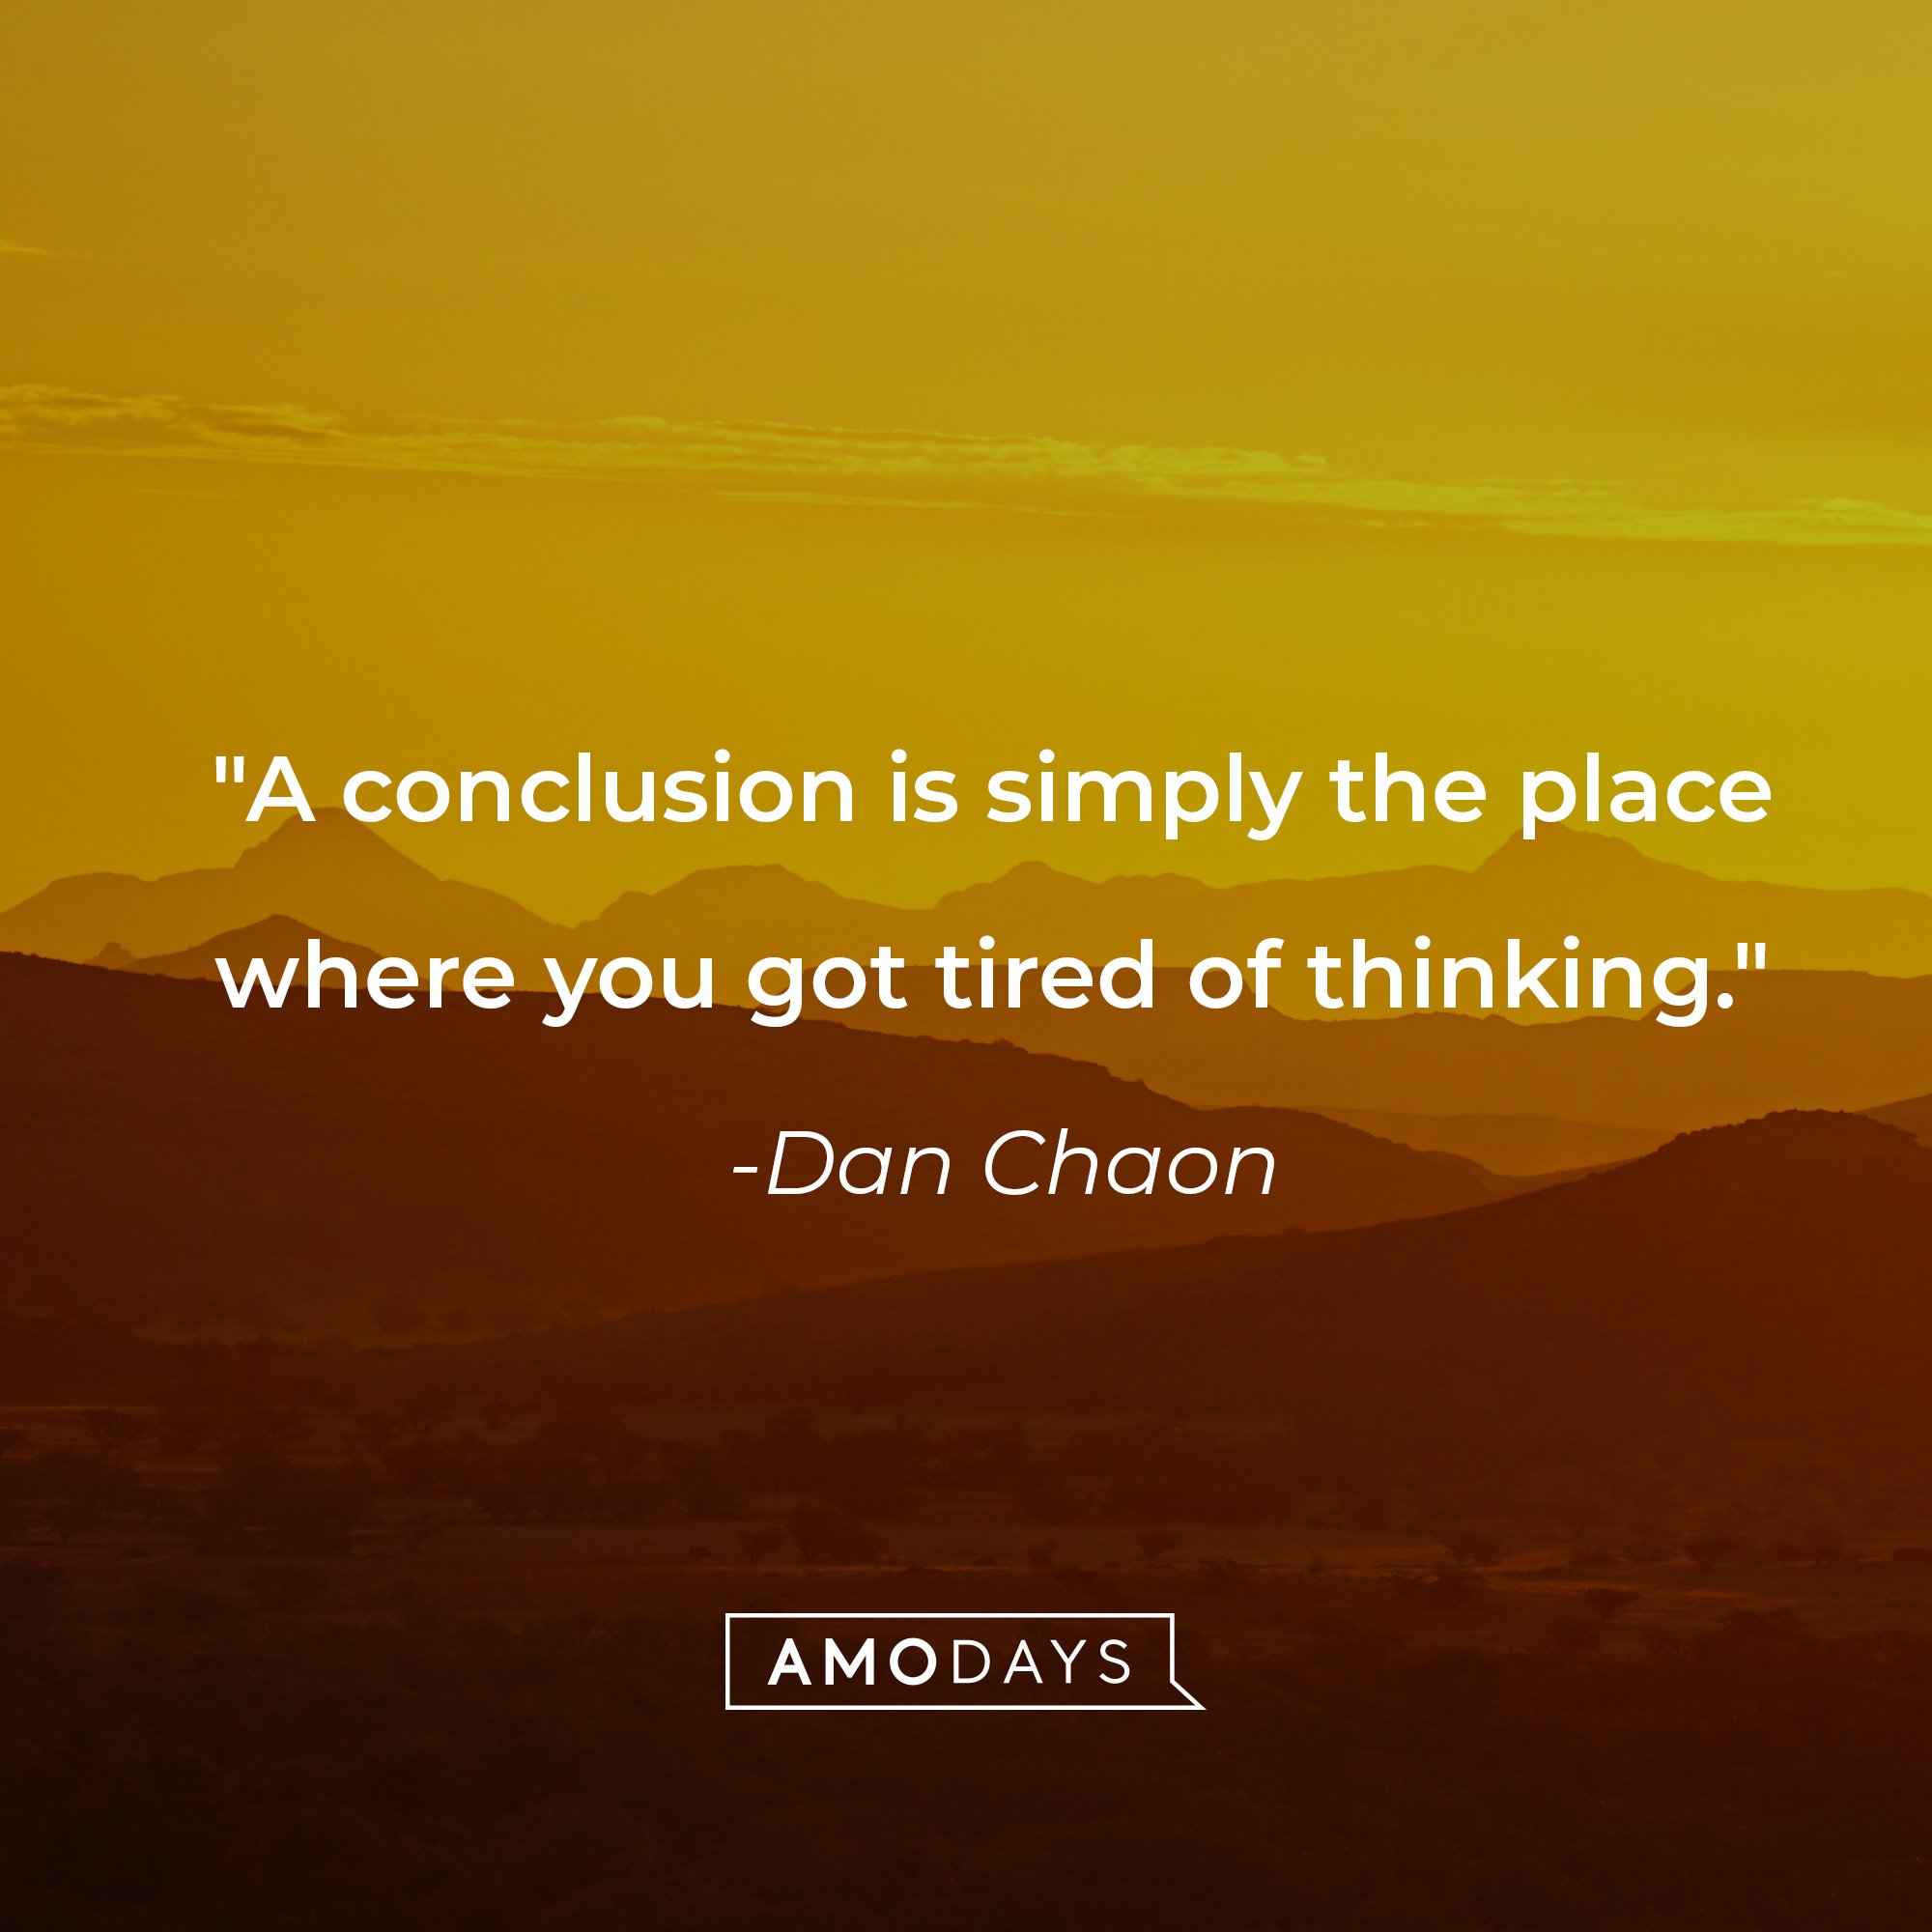 Dan Chaon's quote: "A conclusion is simply the place where you got tired of thinking." | Source: AmoDays